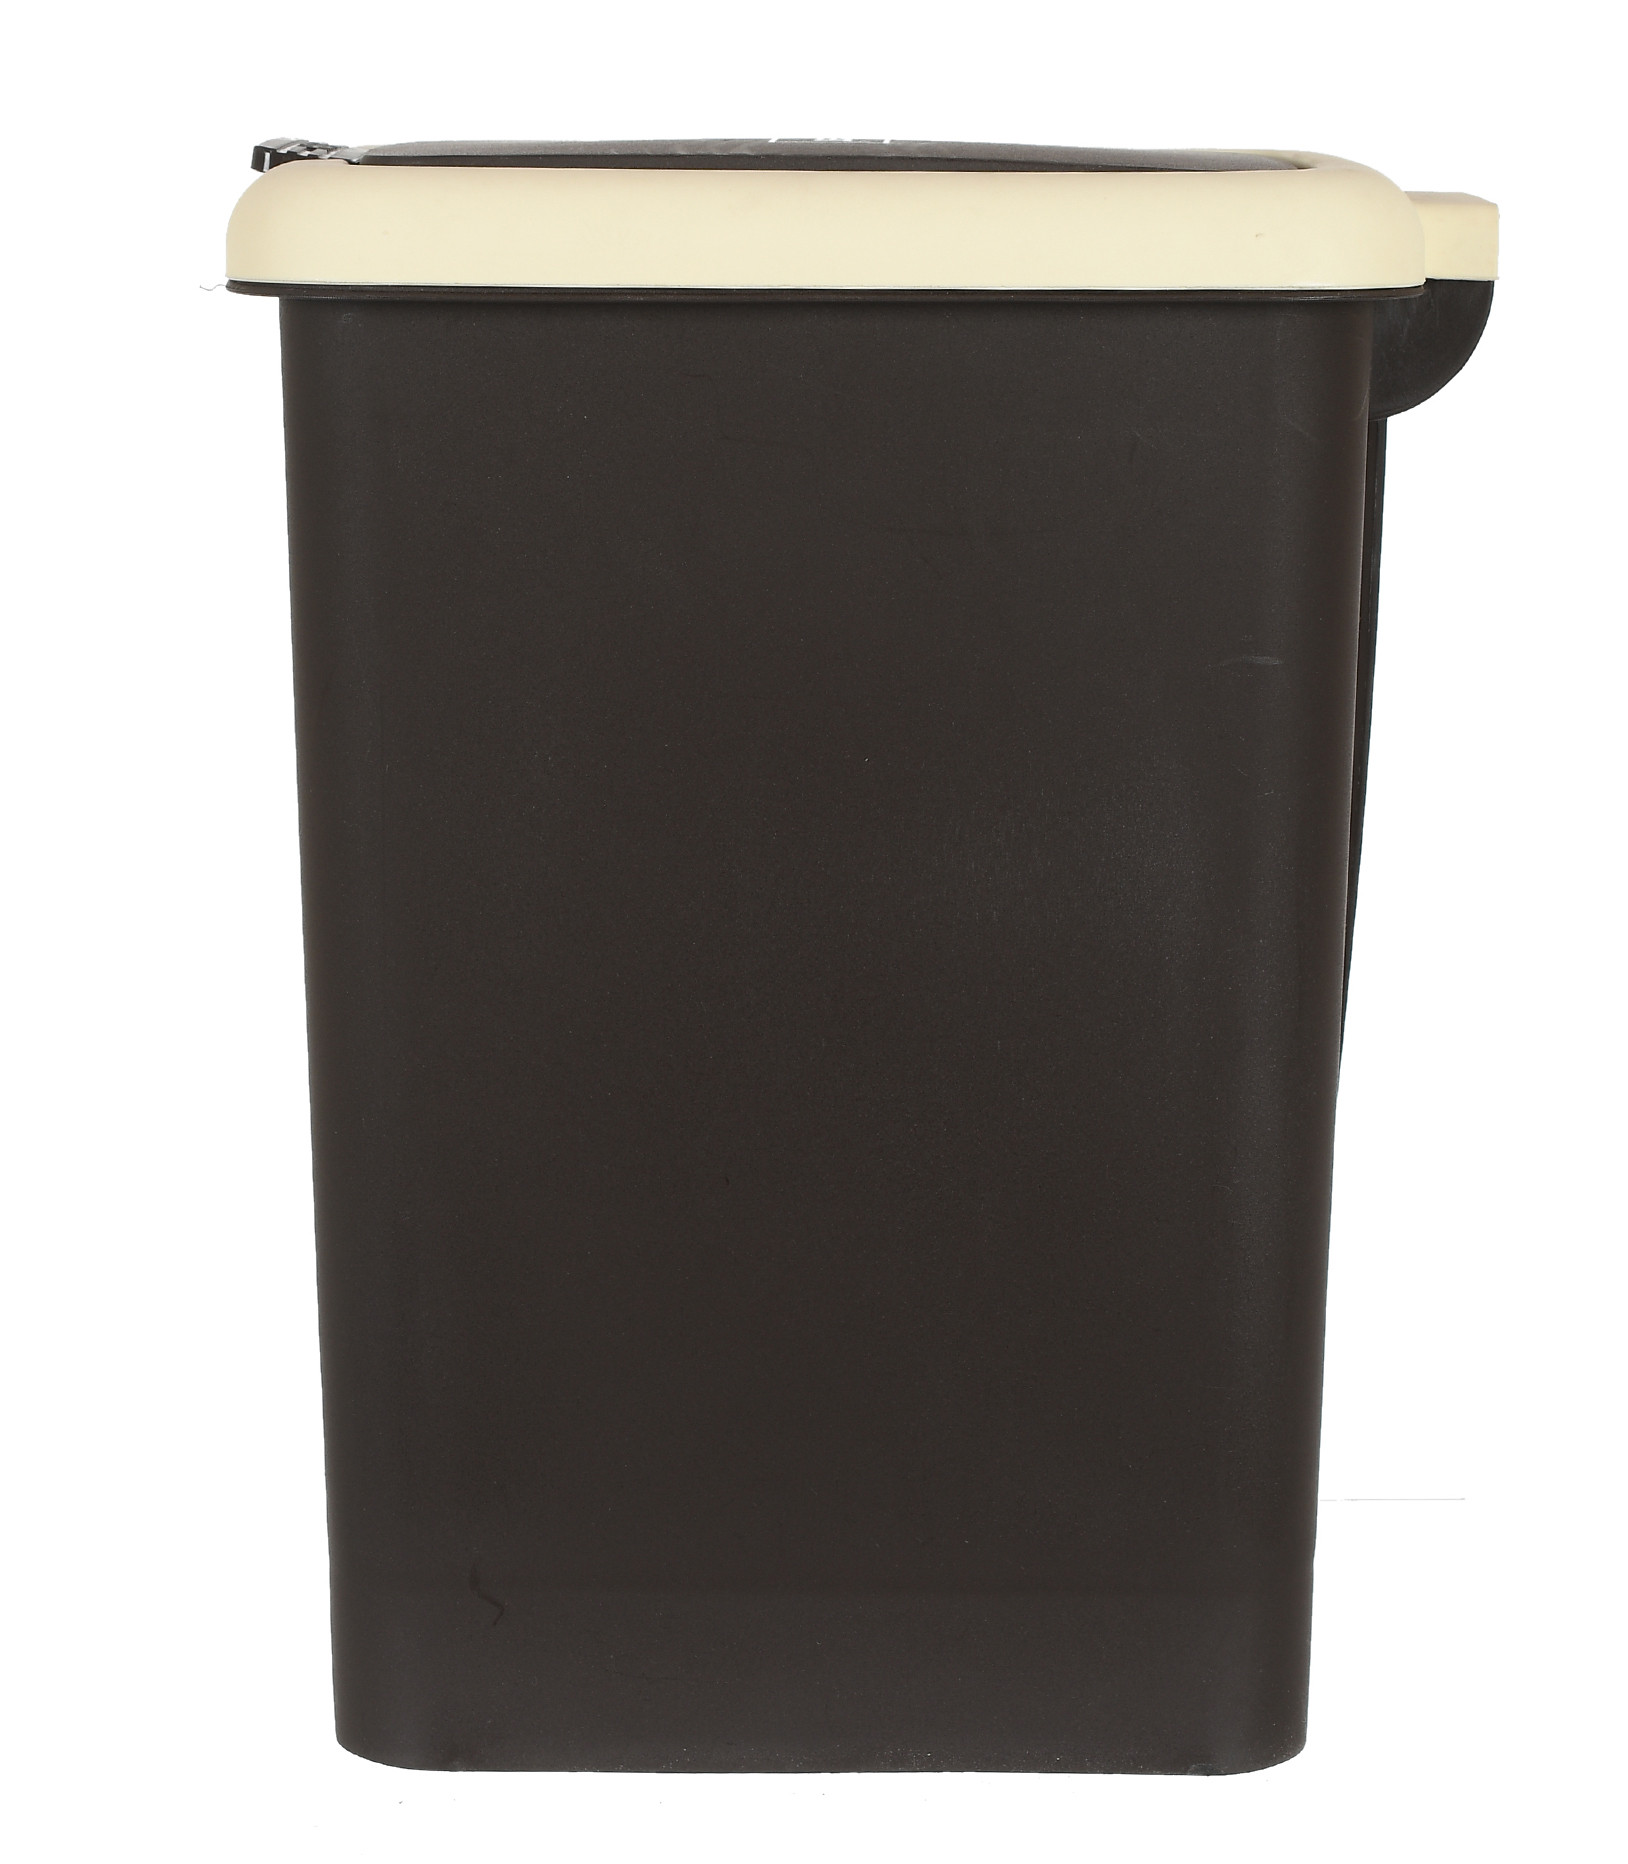 Kuber Industries Portable 6.5 Ltr Plastic Push And Pedal Dustbin With Lid Garbage Bins for Home Office (Black & Cream)